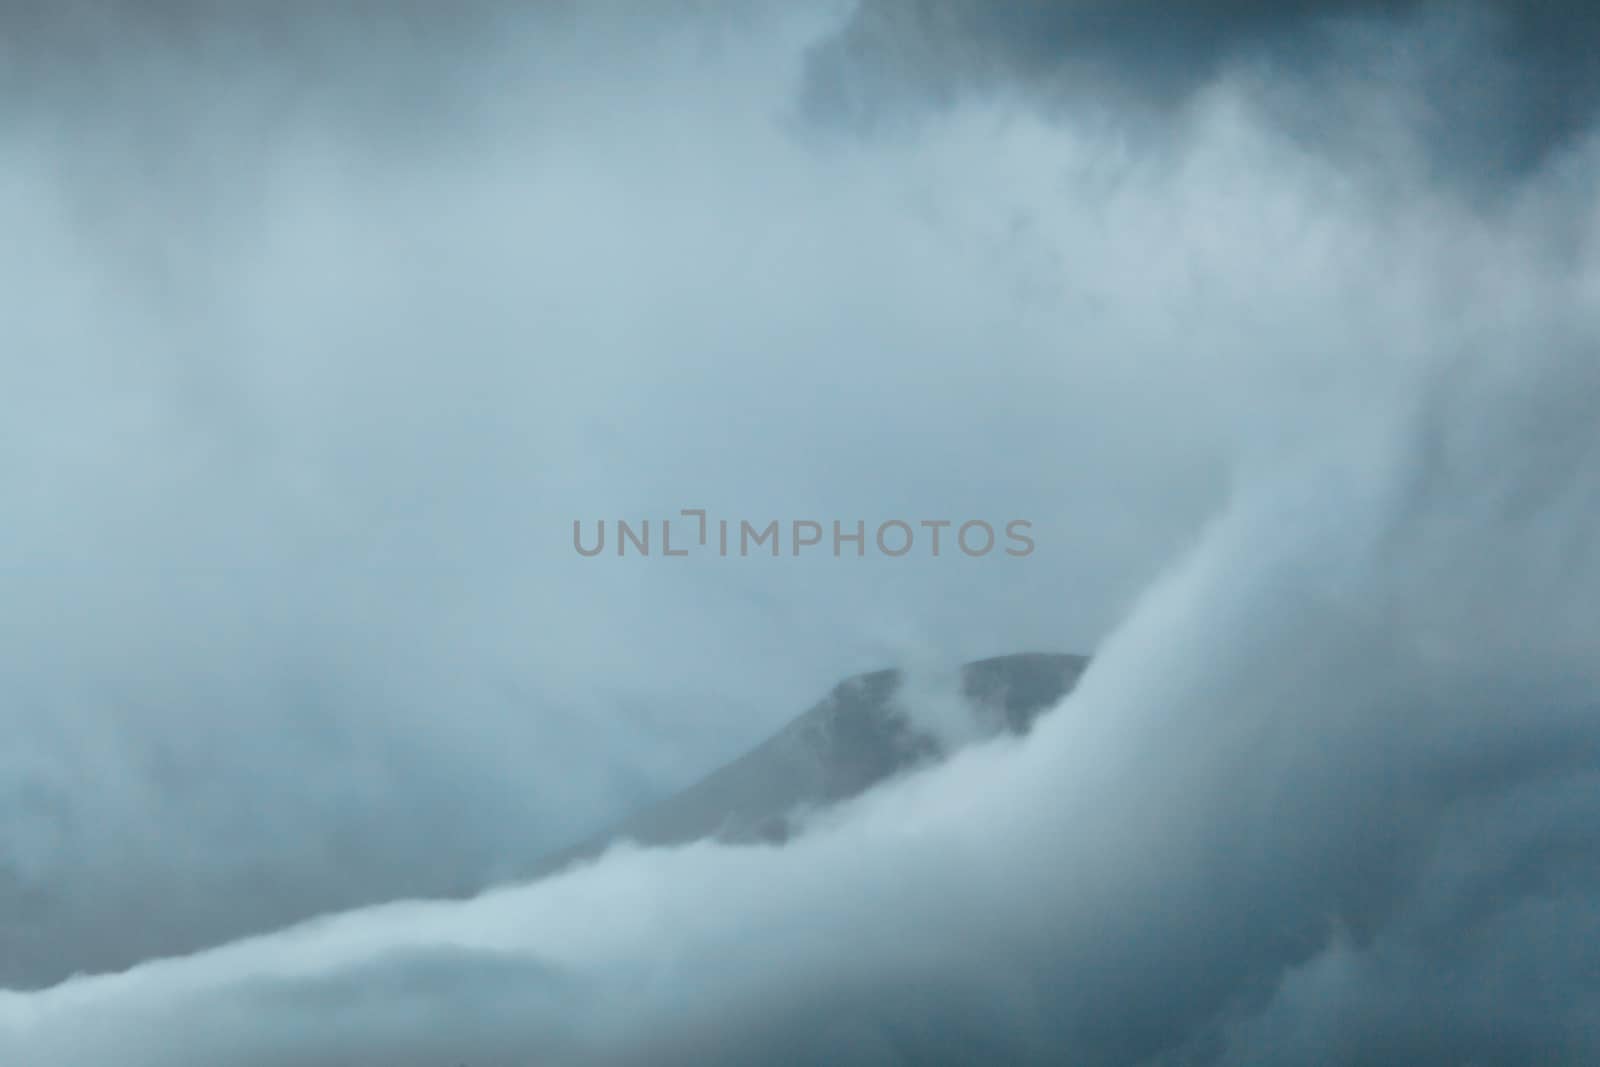 Athabasca glacier covered with clouds, close-up